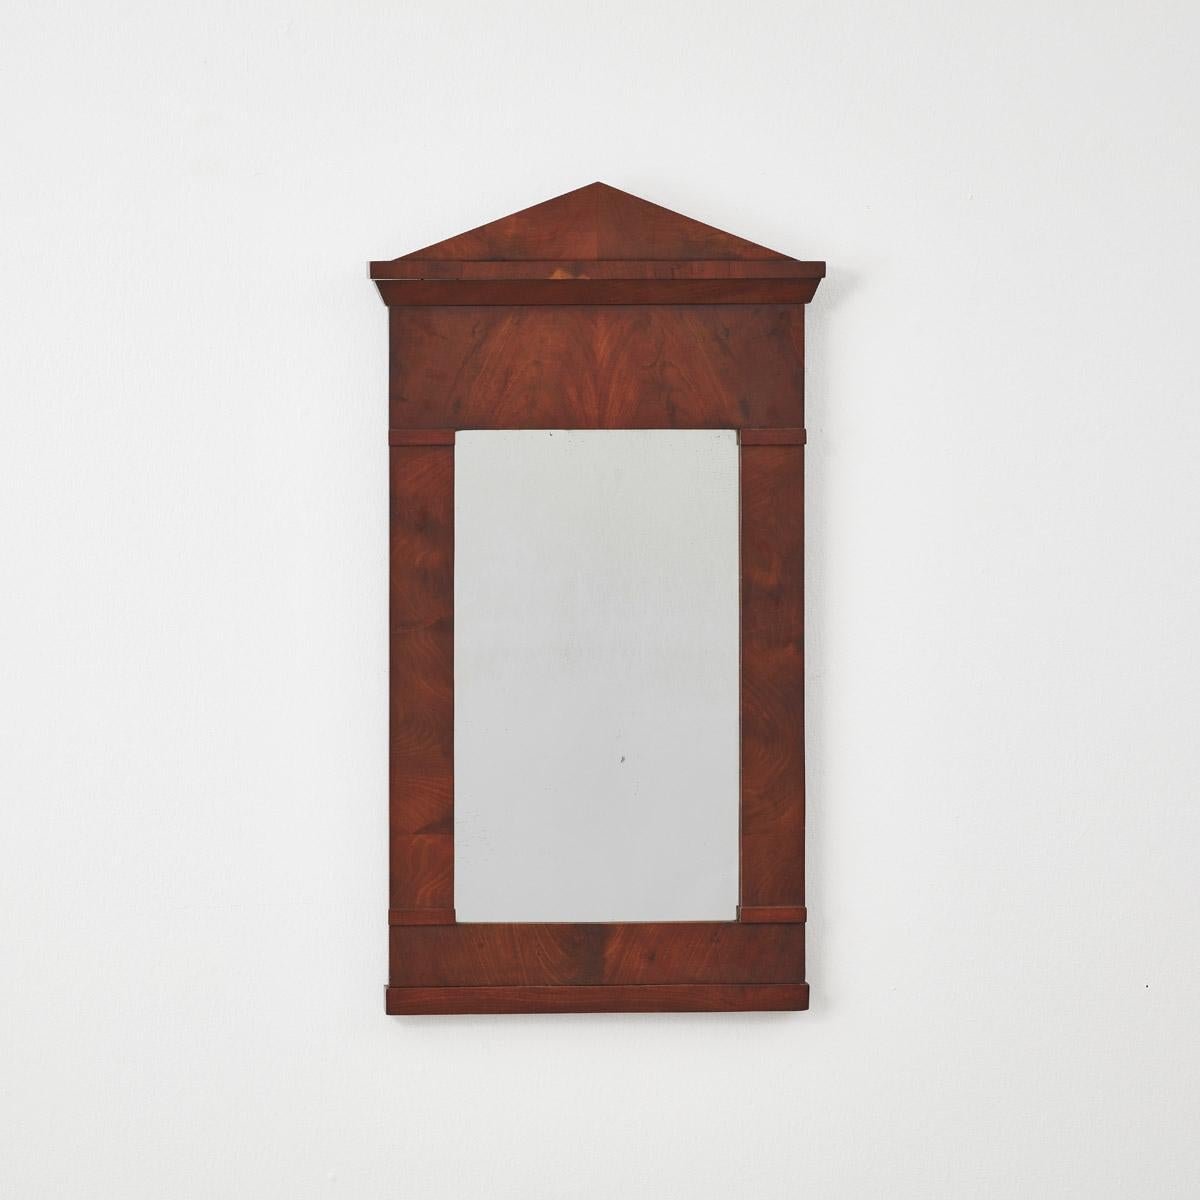 Crafted from rich mahogany, this antique Classical empire style mirror boasts elegance with its bold lines’ characteristic of the neoclassical aesthetic. Its narrow profile makes it ideal for smaller spaces such as a hallway, bathroom or cloakroom. 